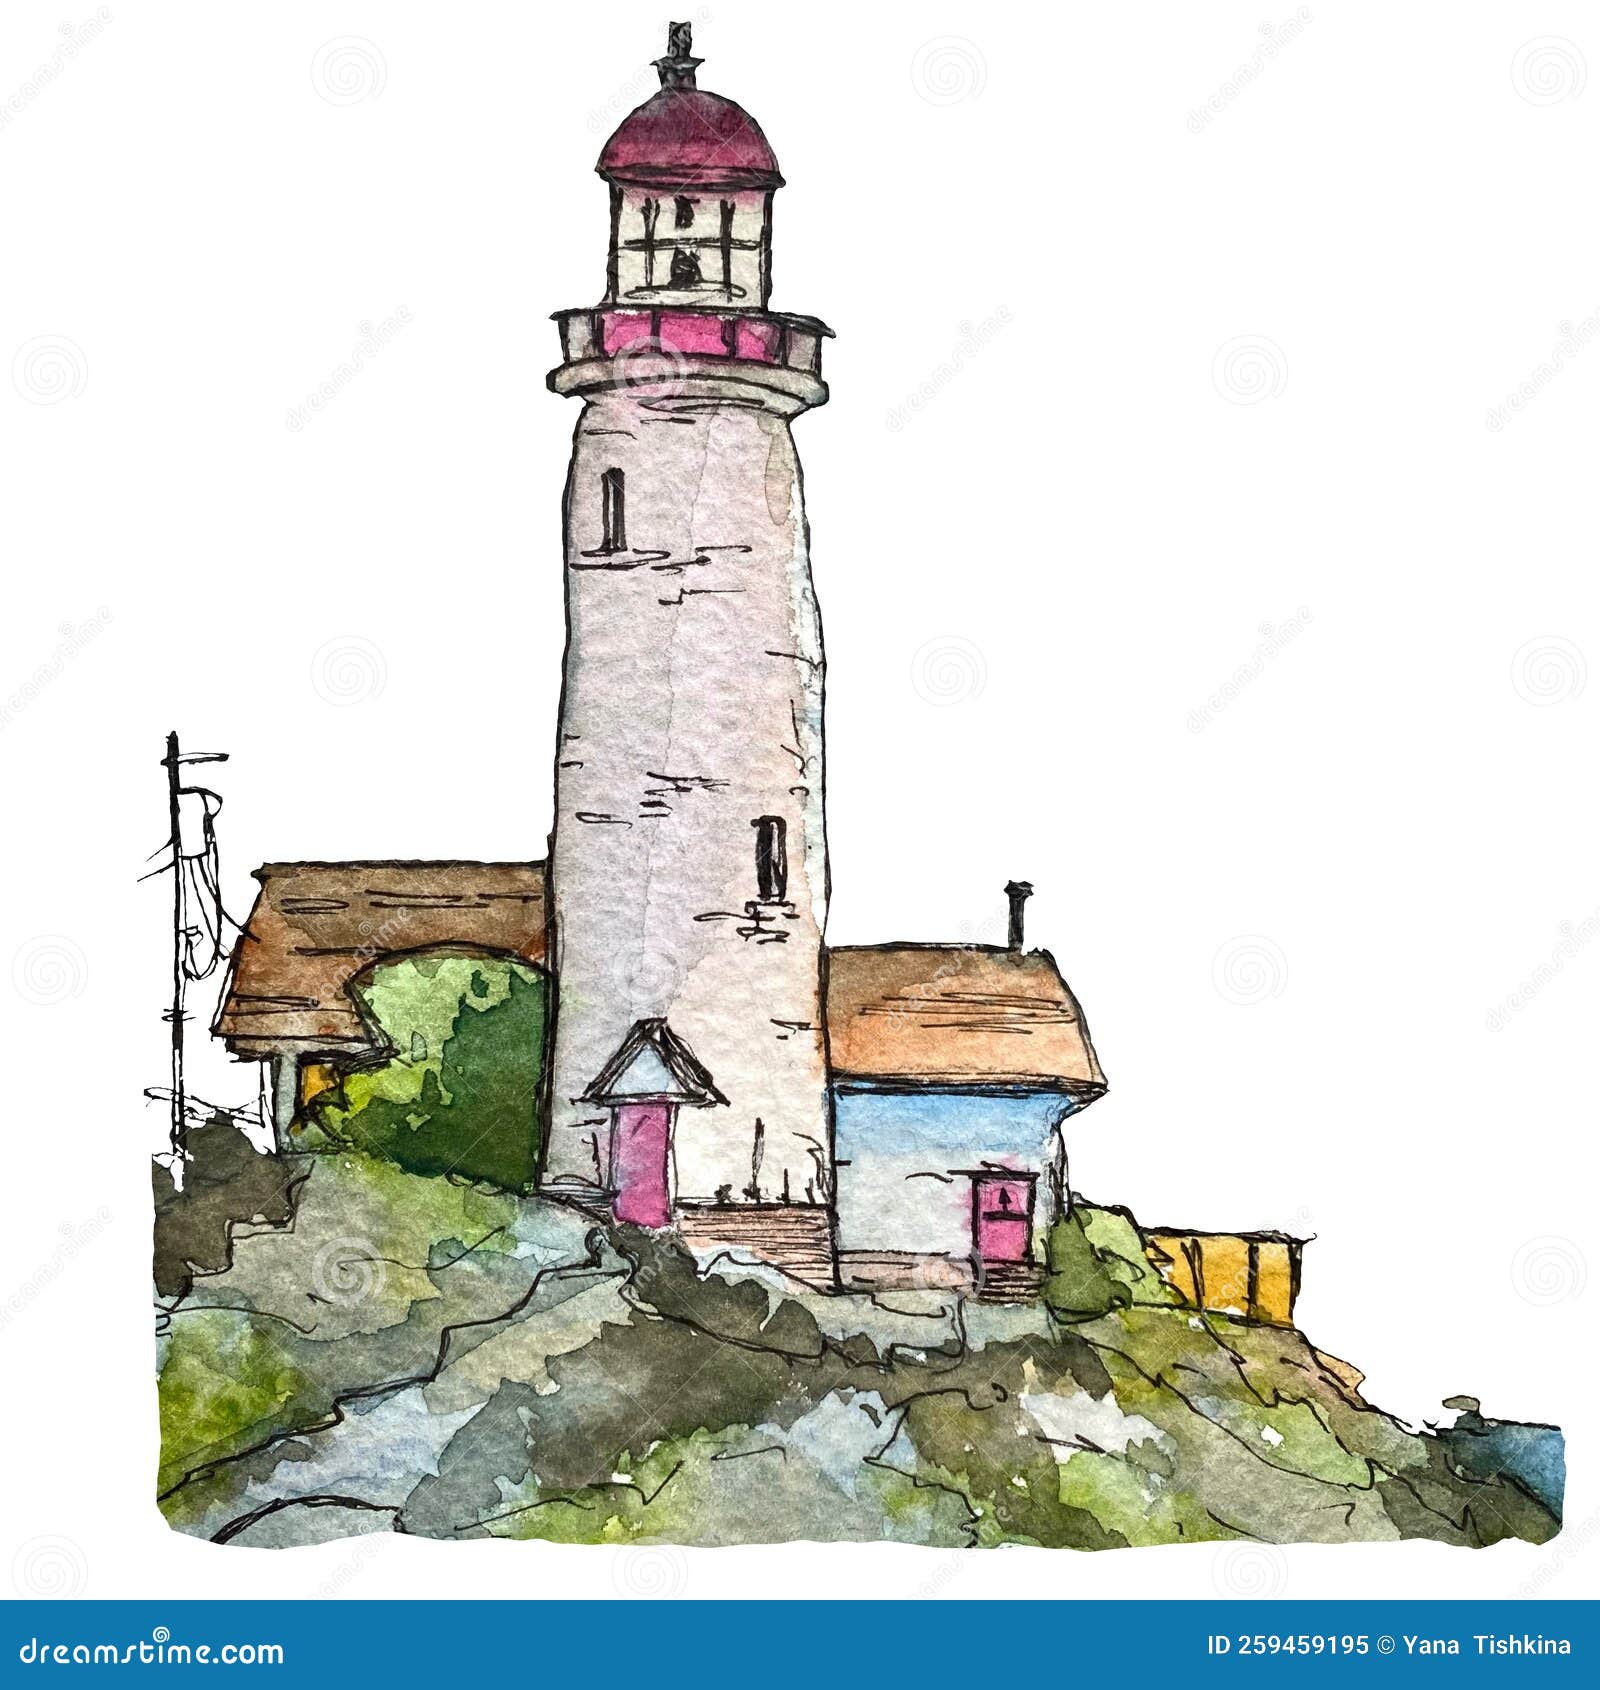 Sketch of the lighthouse that stands on the island coloring book  caricature isolated object on a white background vector  CanStock